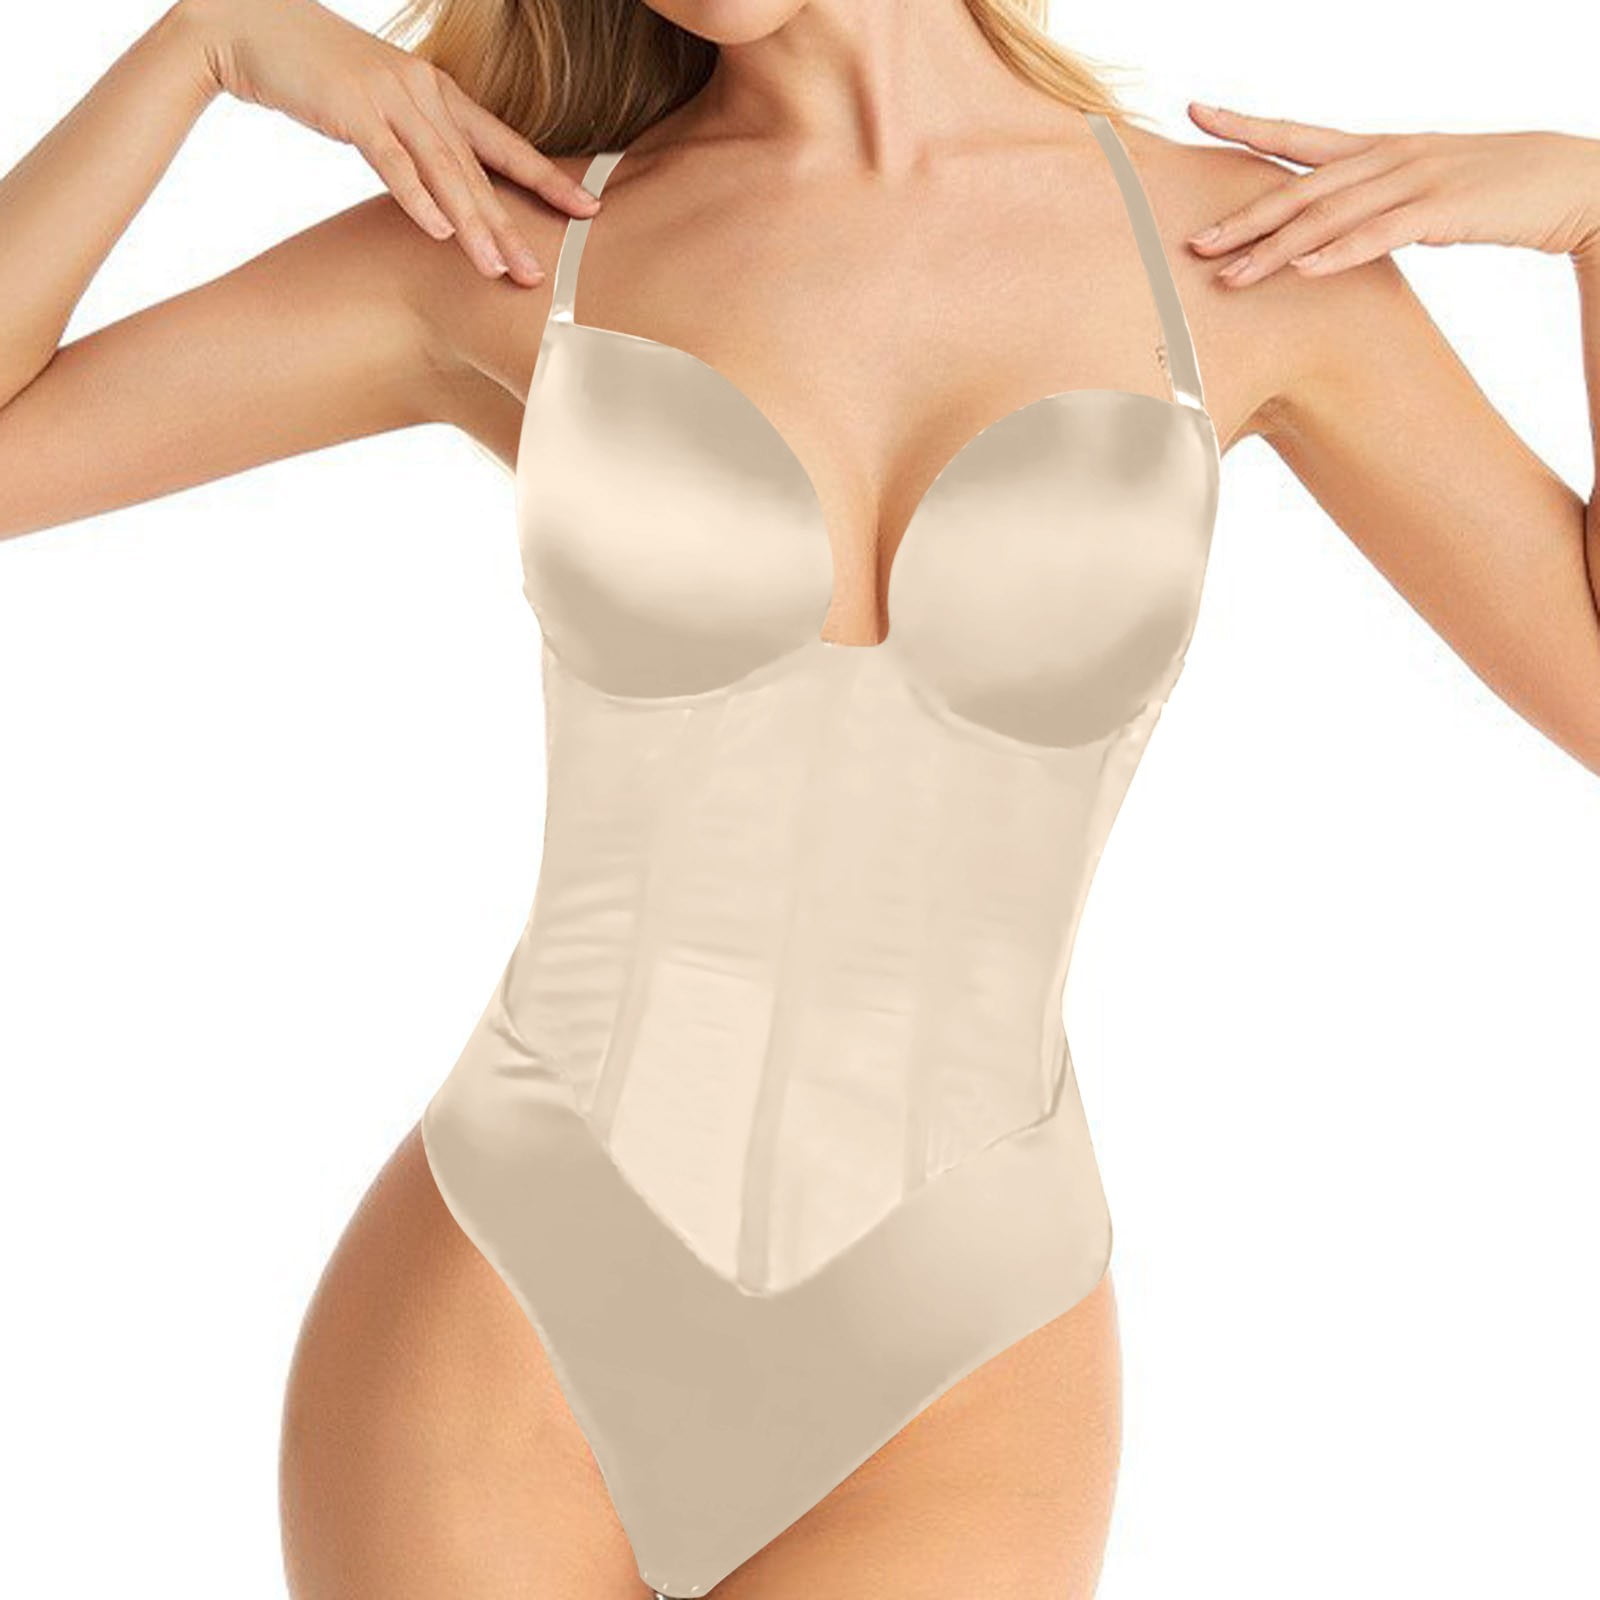 Flaunt Your Low Back Dress with Confidence in Women's Backless Shapewear:  Deep V-Neck Body Shaper Designed Provide Support and Enhance Your Silhouette